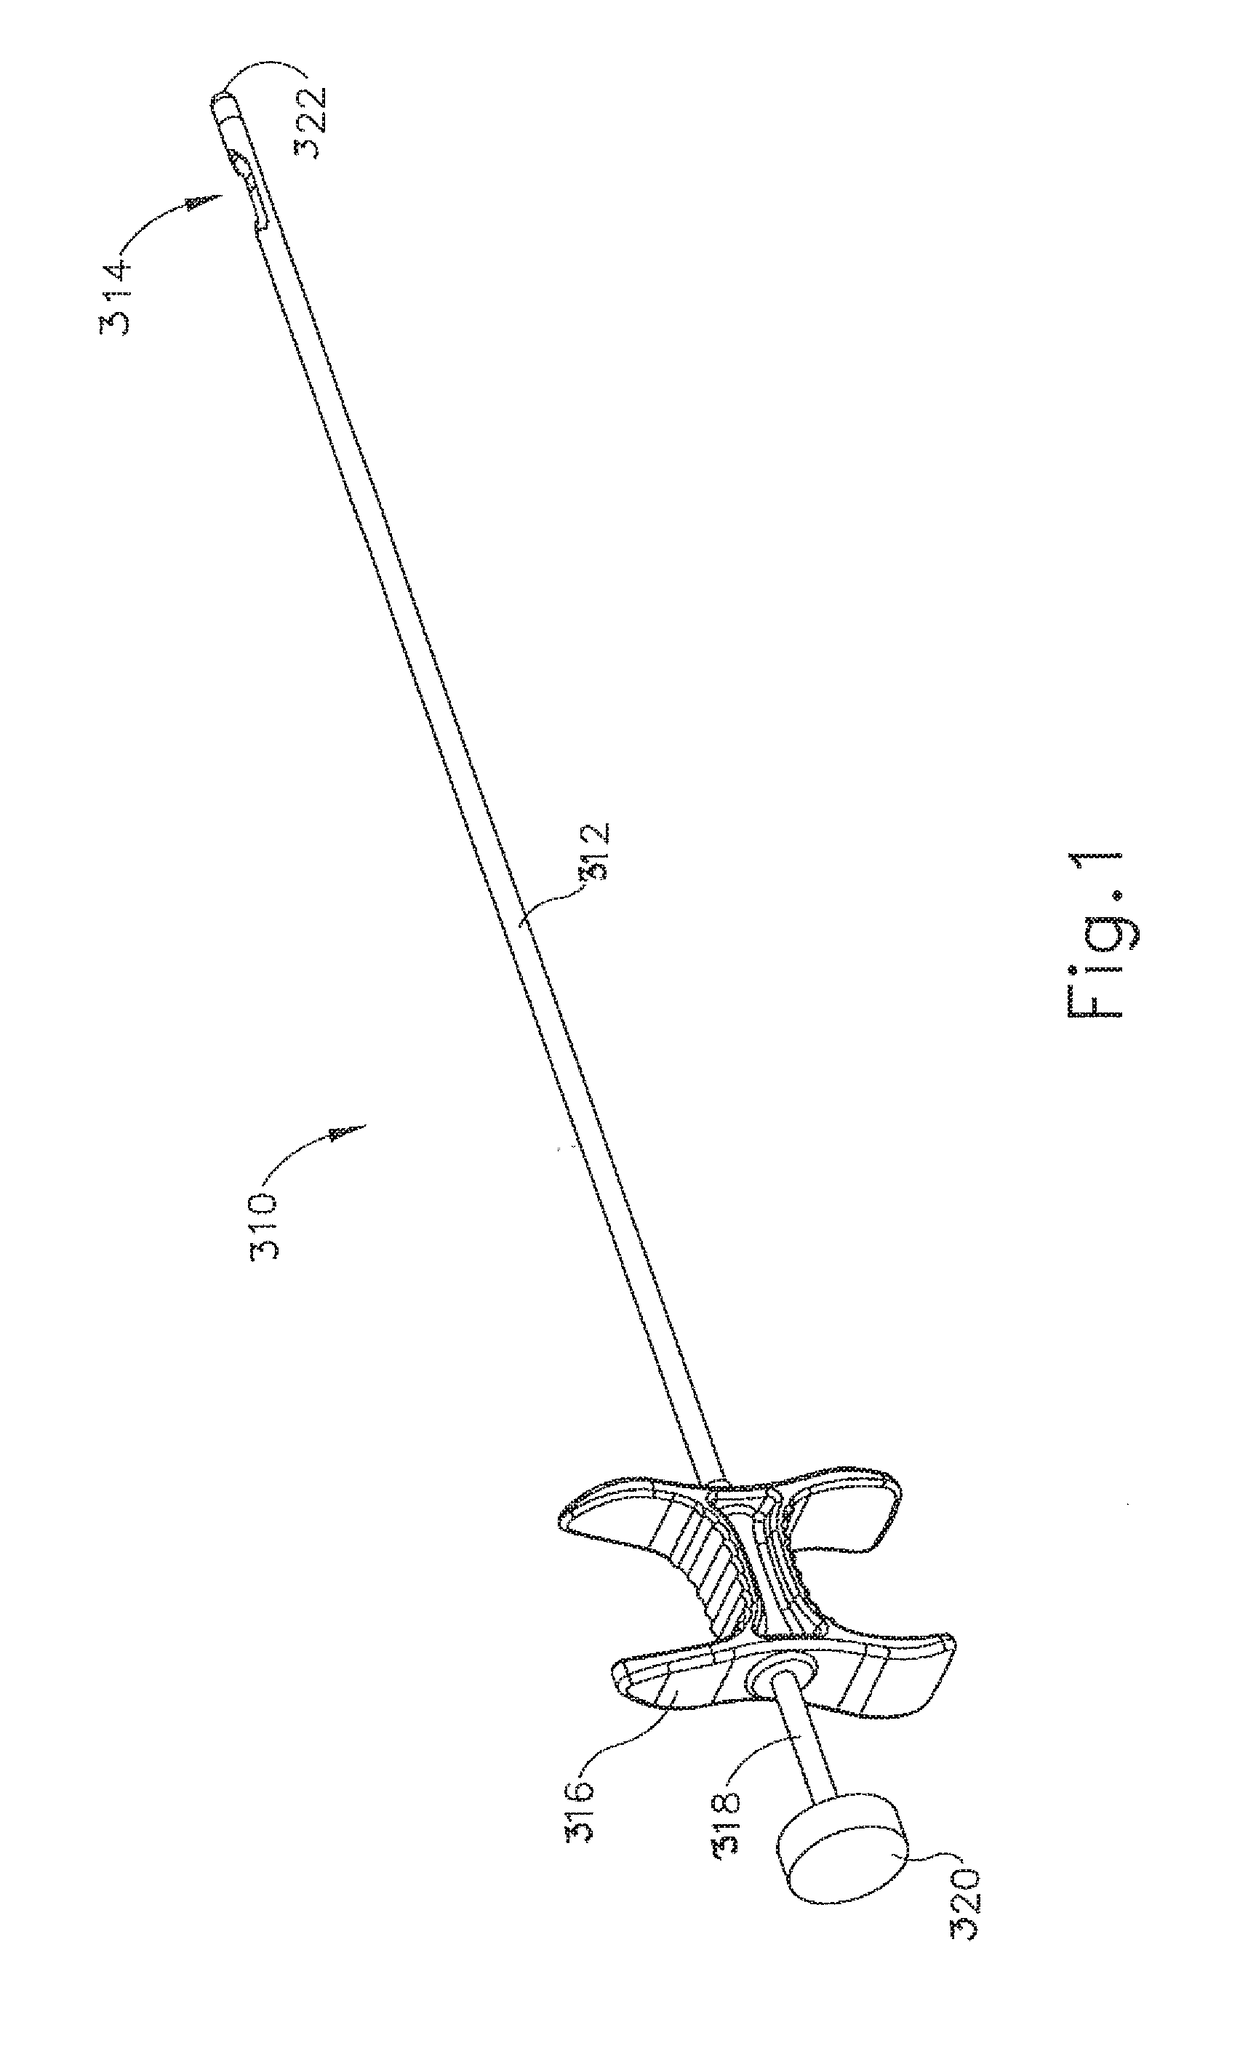 Marker delivery device for use with MRI breast biopsy system